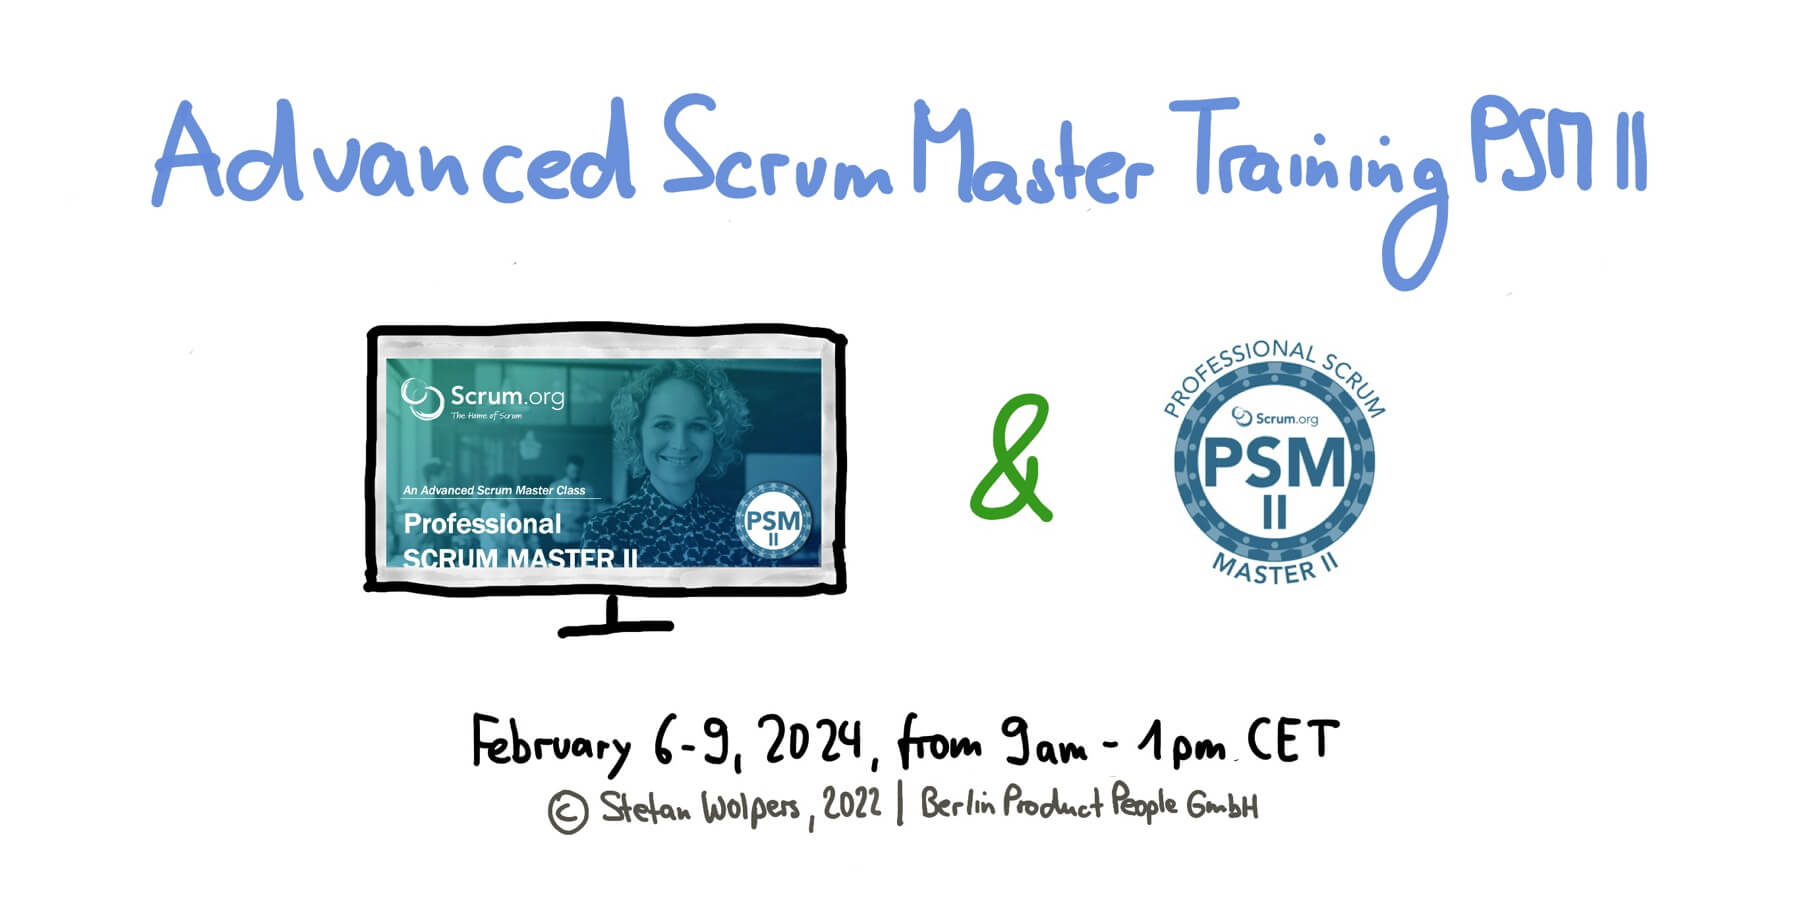 Advanced Professional Scrum Master Online Training w/ PSM II Certificate — February 6-9, 2024 — Berlin-Product-People.com